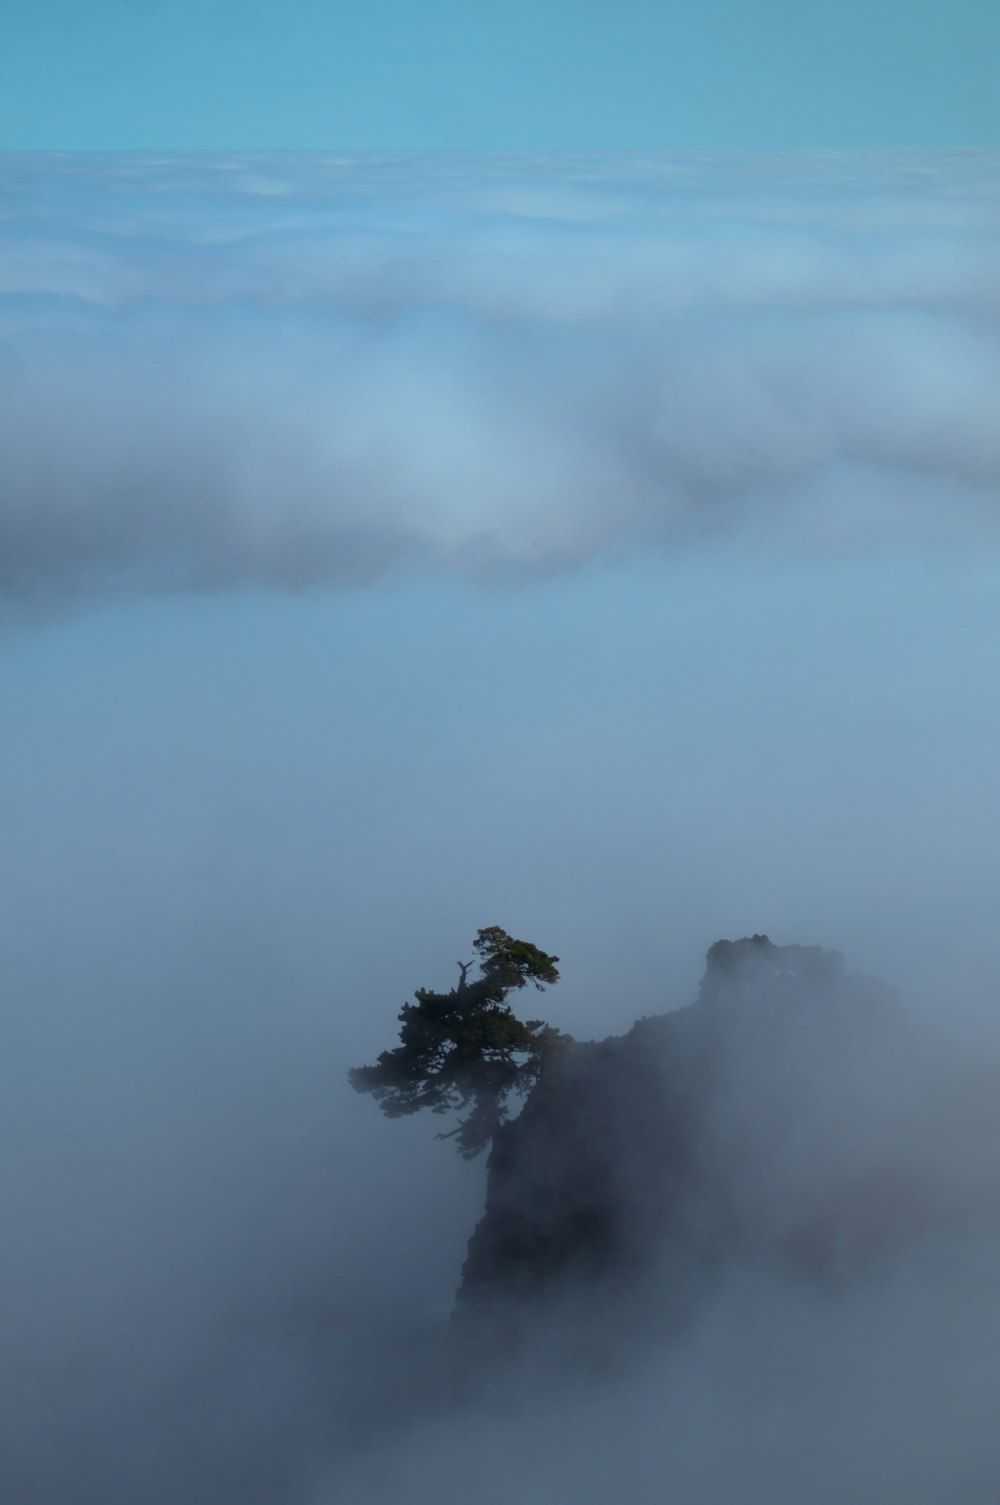 a lone tree in the middle of a sea of fog